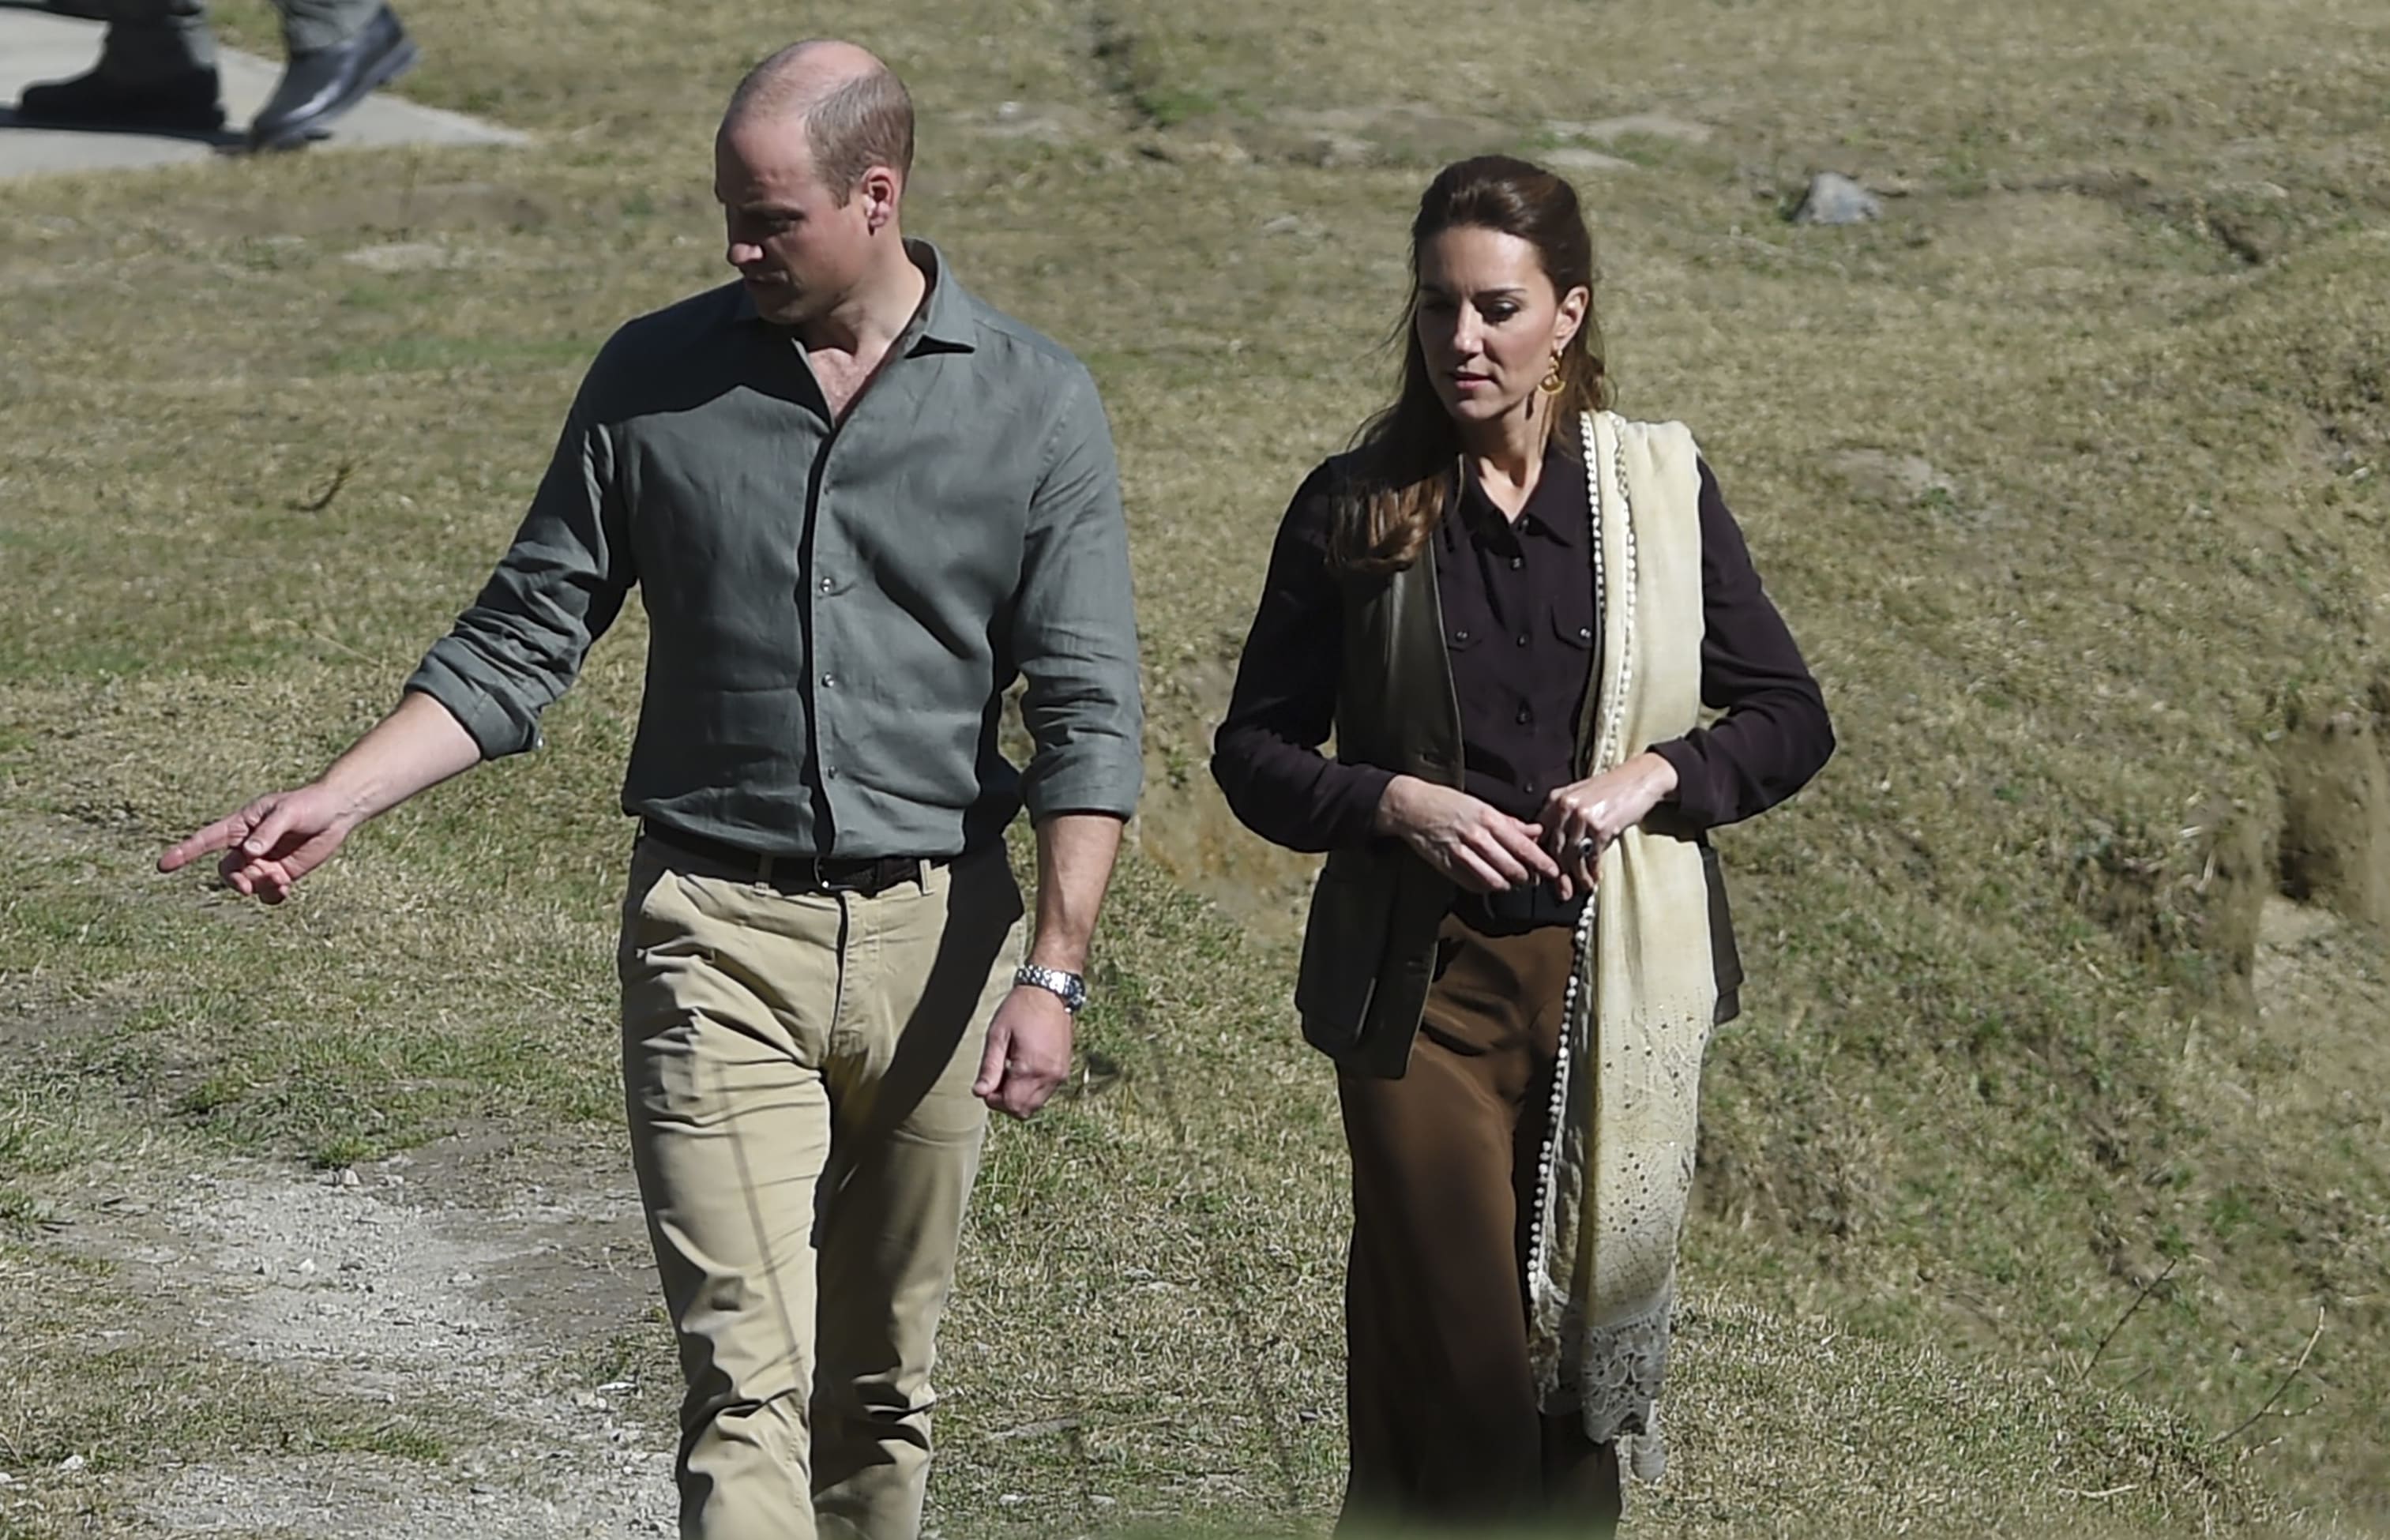 Britain's Prince William (L), Duke of Cambridge and his wife Catherine (R), Duchess of Cambridge, walks on their arrival at the Kalash tribe village in Bumburate Valley in Pakistan northern Chitral District on October 16, 2019.